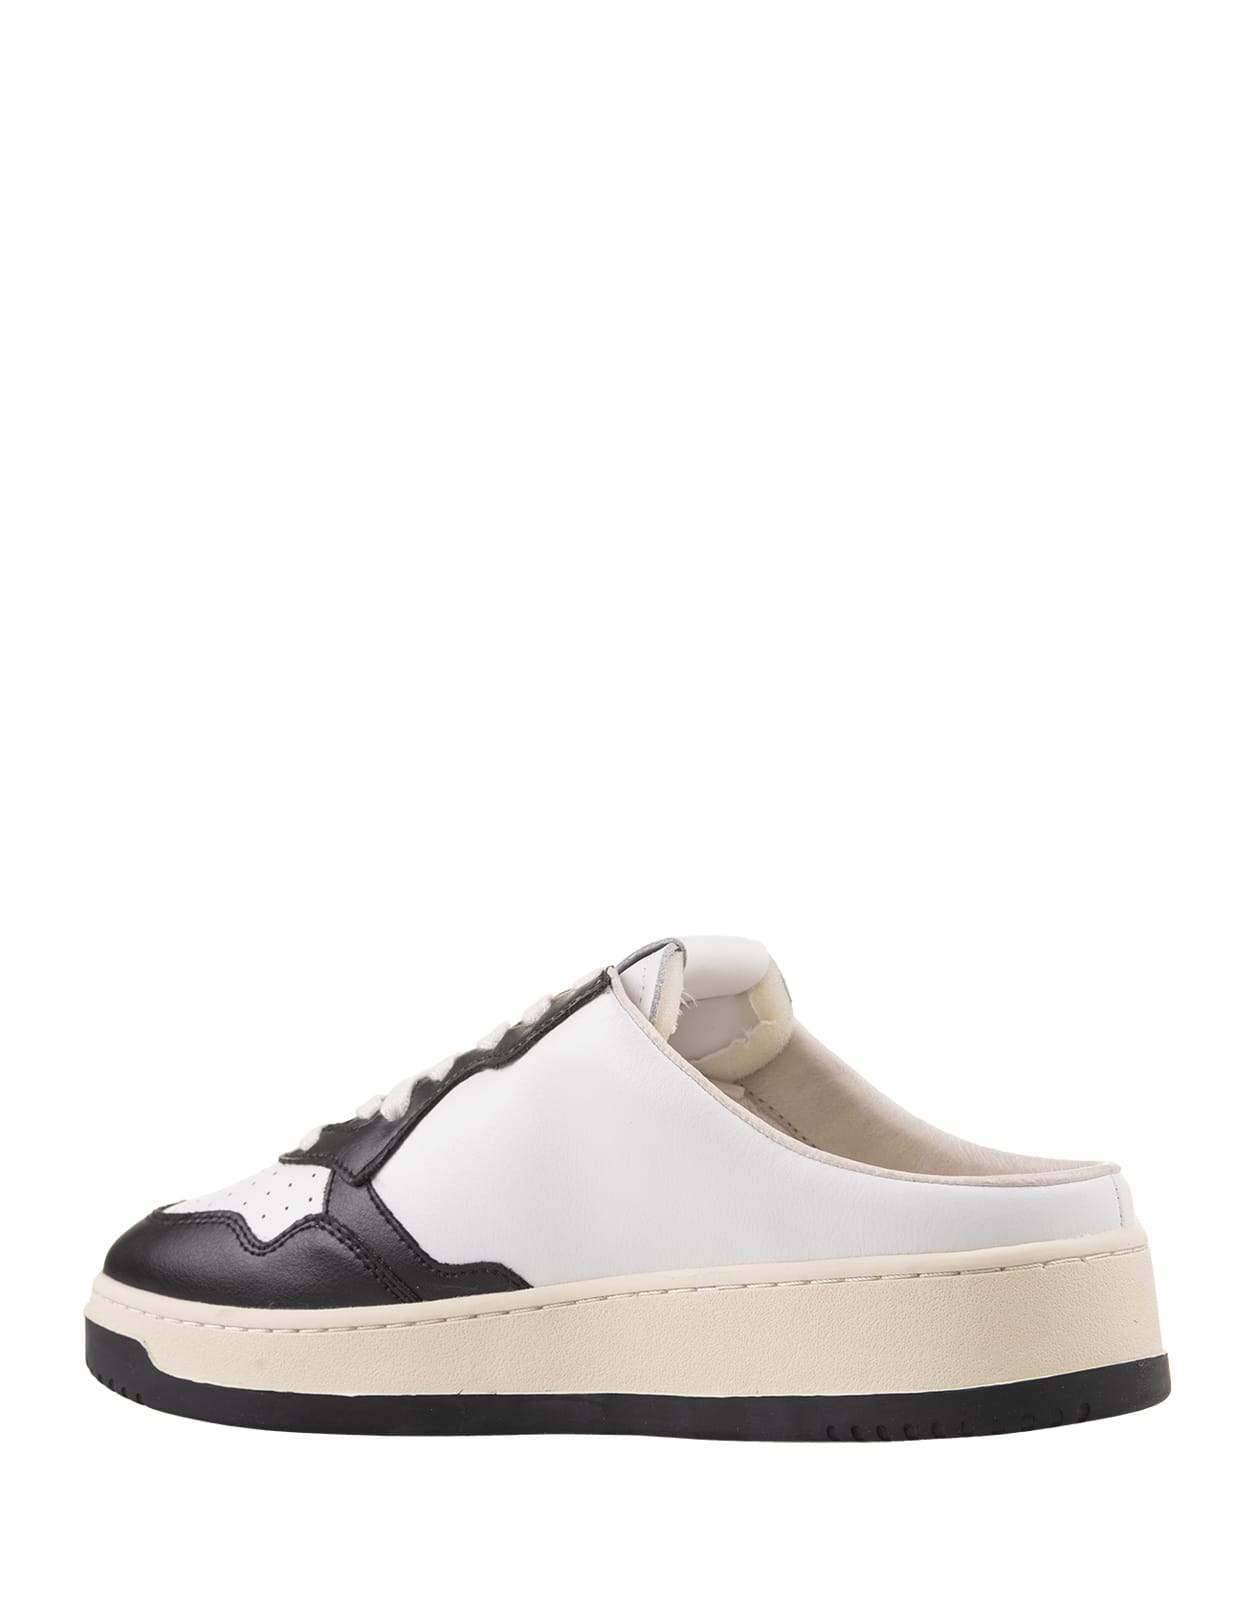 Shop Autry White And Black Medalist Mule Sneakers